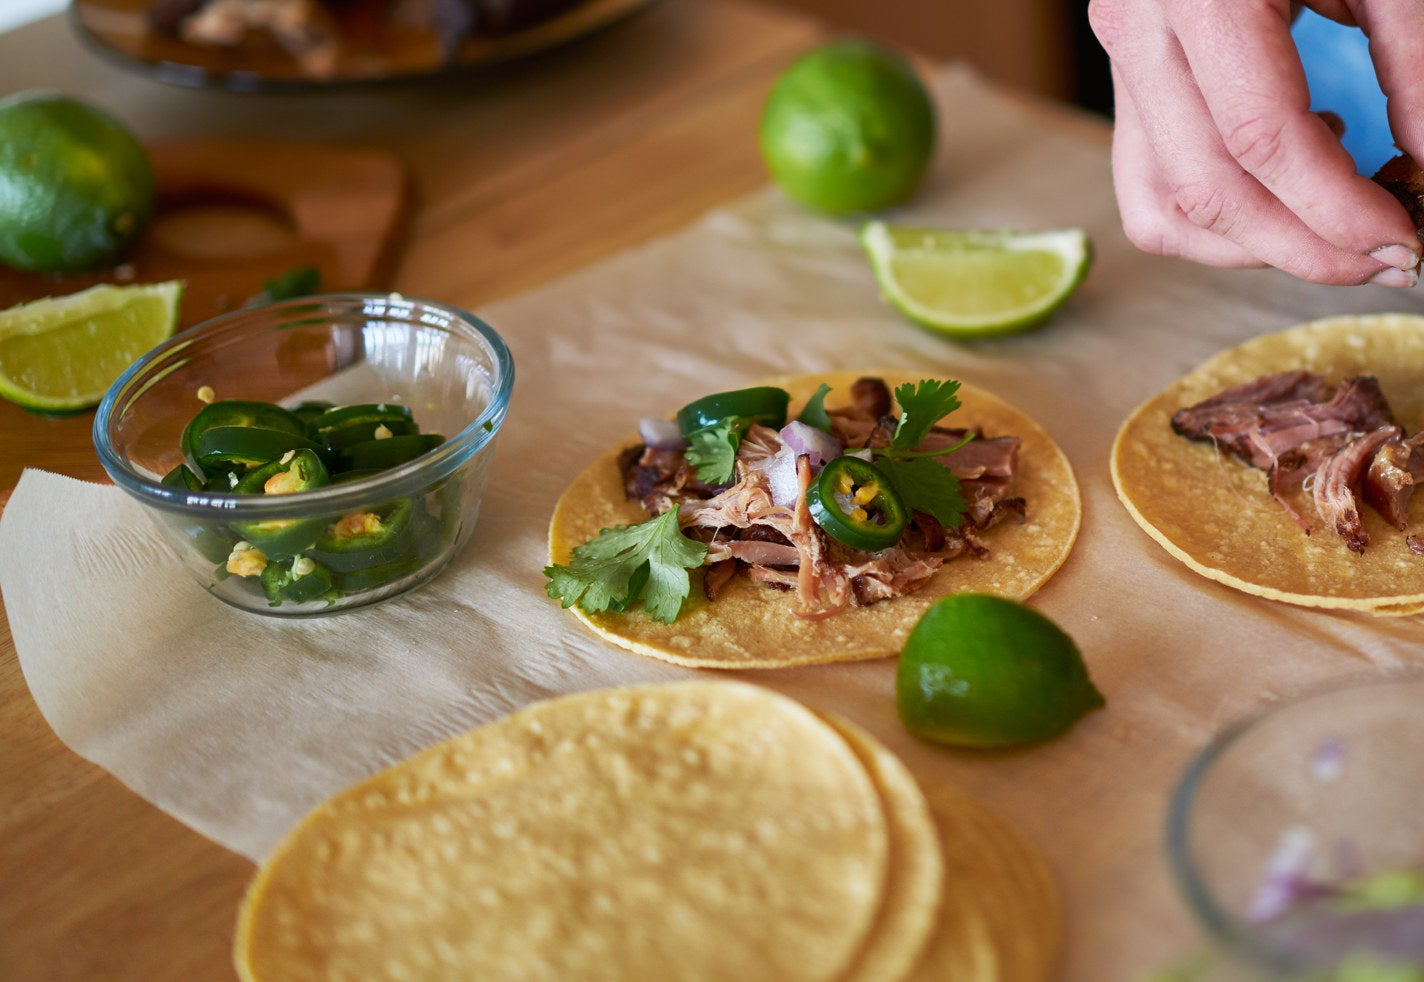 A person assembling meat tacos.